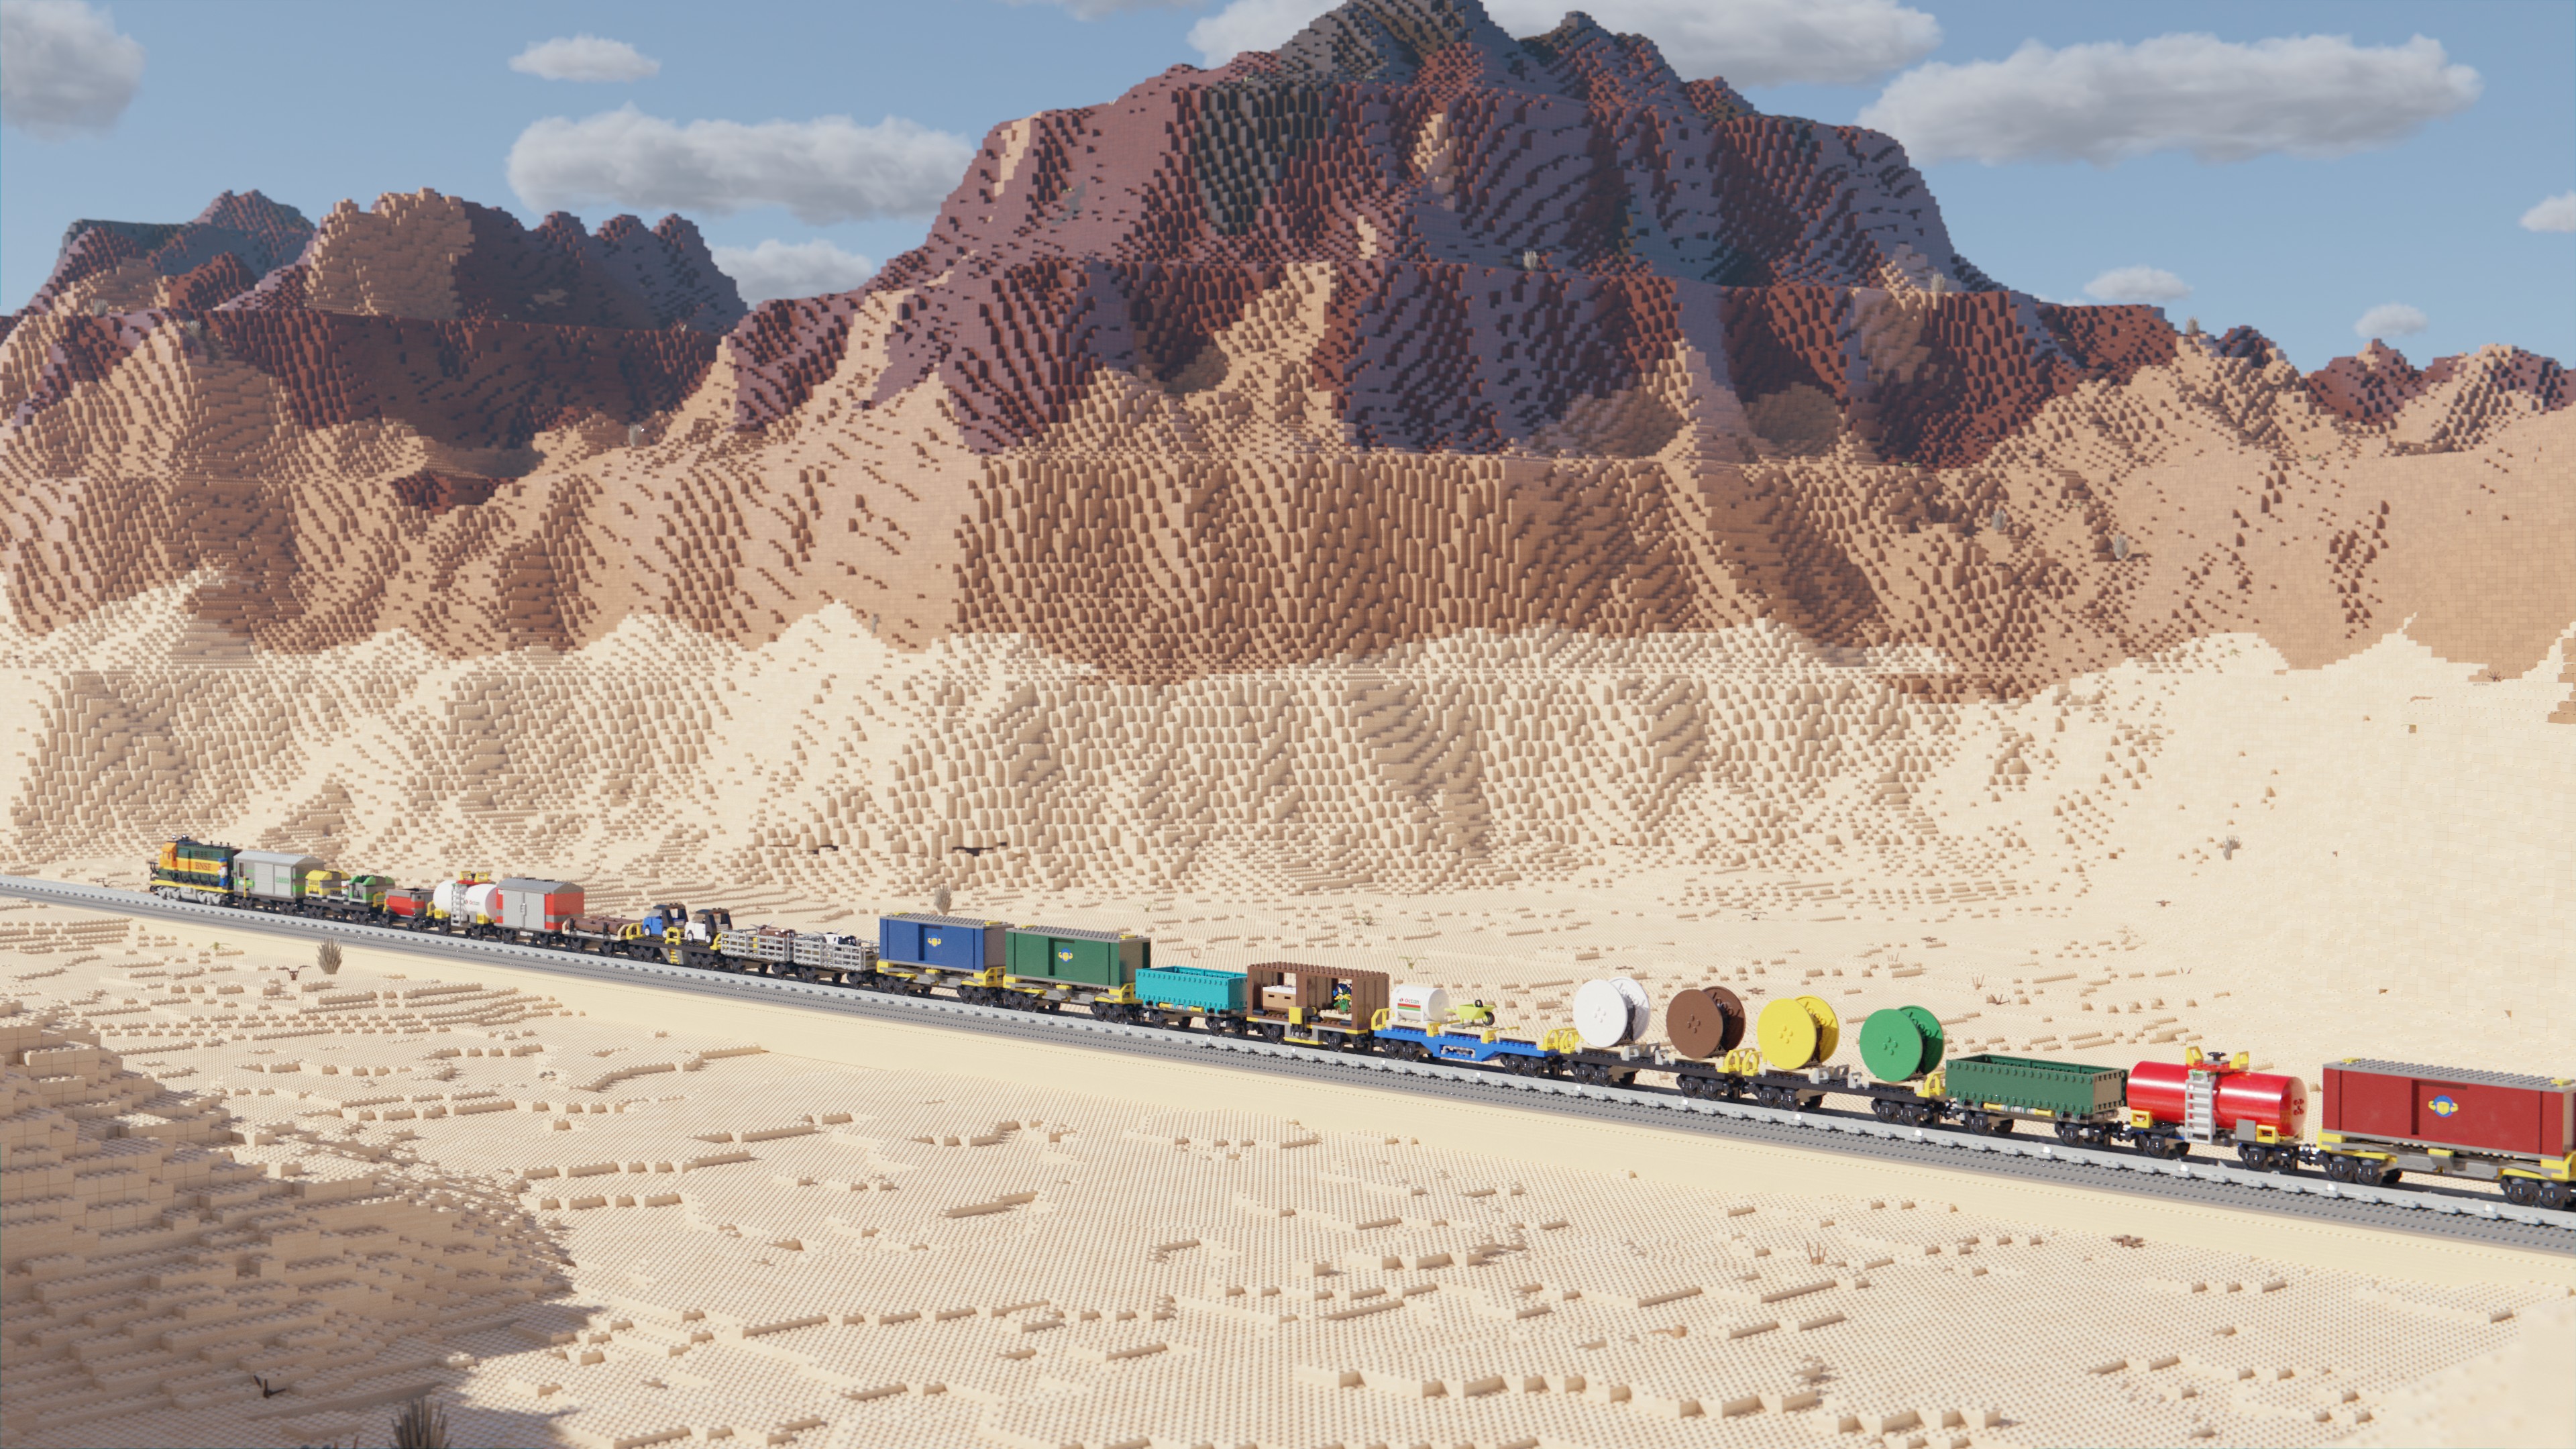 Image of a Lego train travelling through a desert landscape on a sunny day with some clouds in the sky.